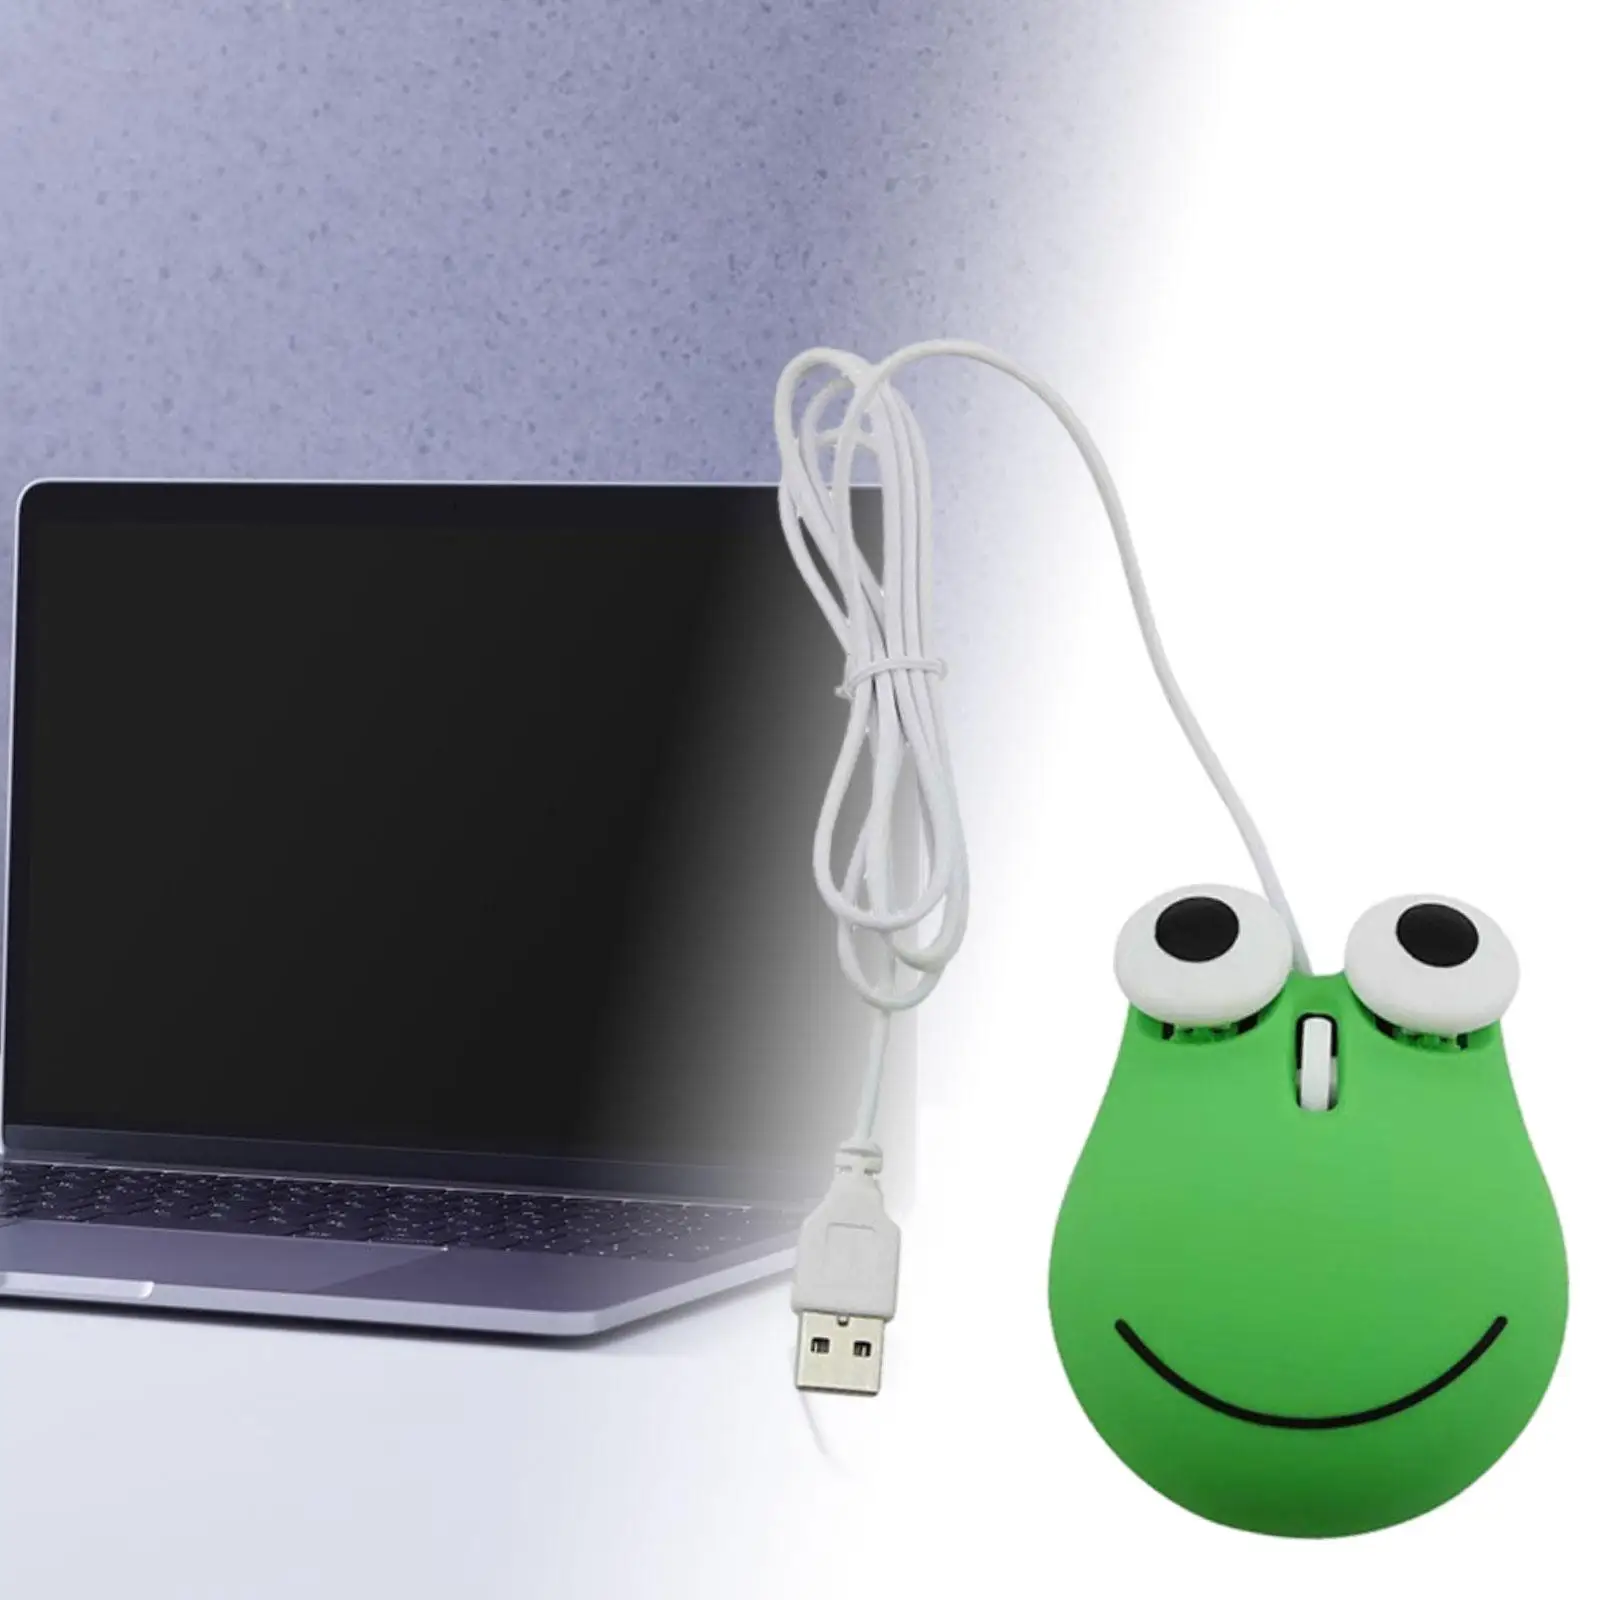 

Wired Mice Cute Mice Comfortable to Use Plug and Play with 135cm USB Cable Big Eyed Green Frog for Desktop Laptop Computer